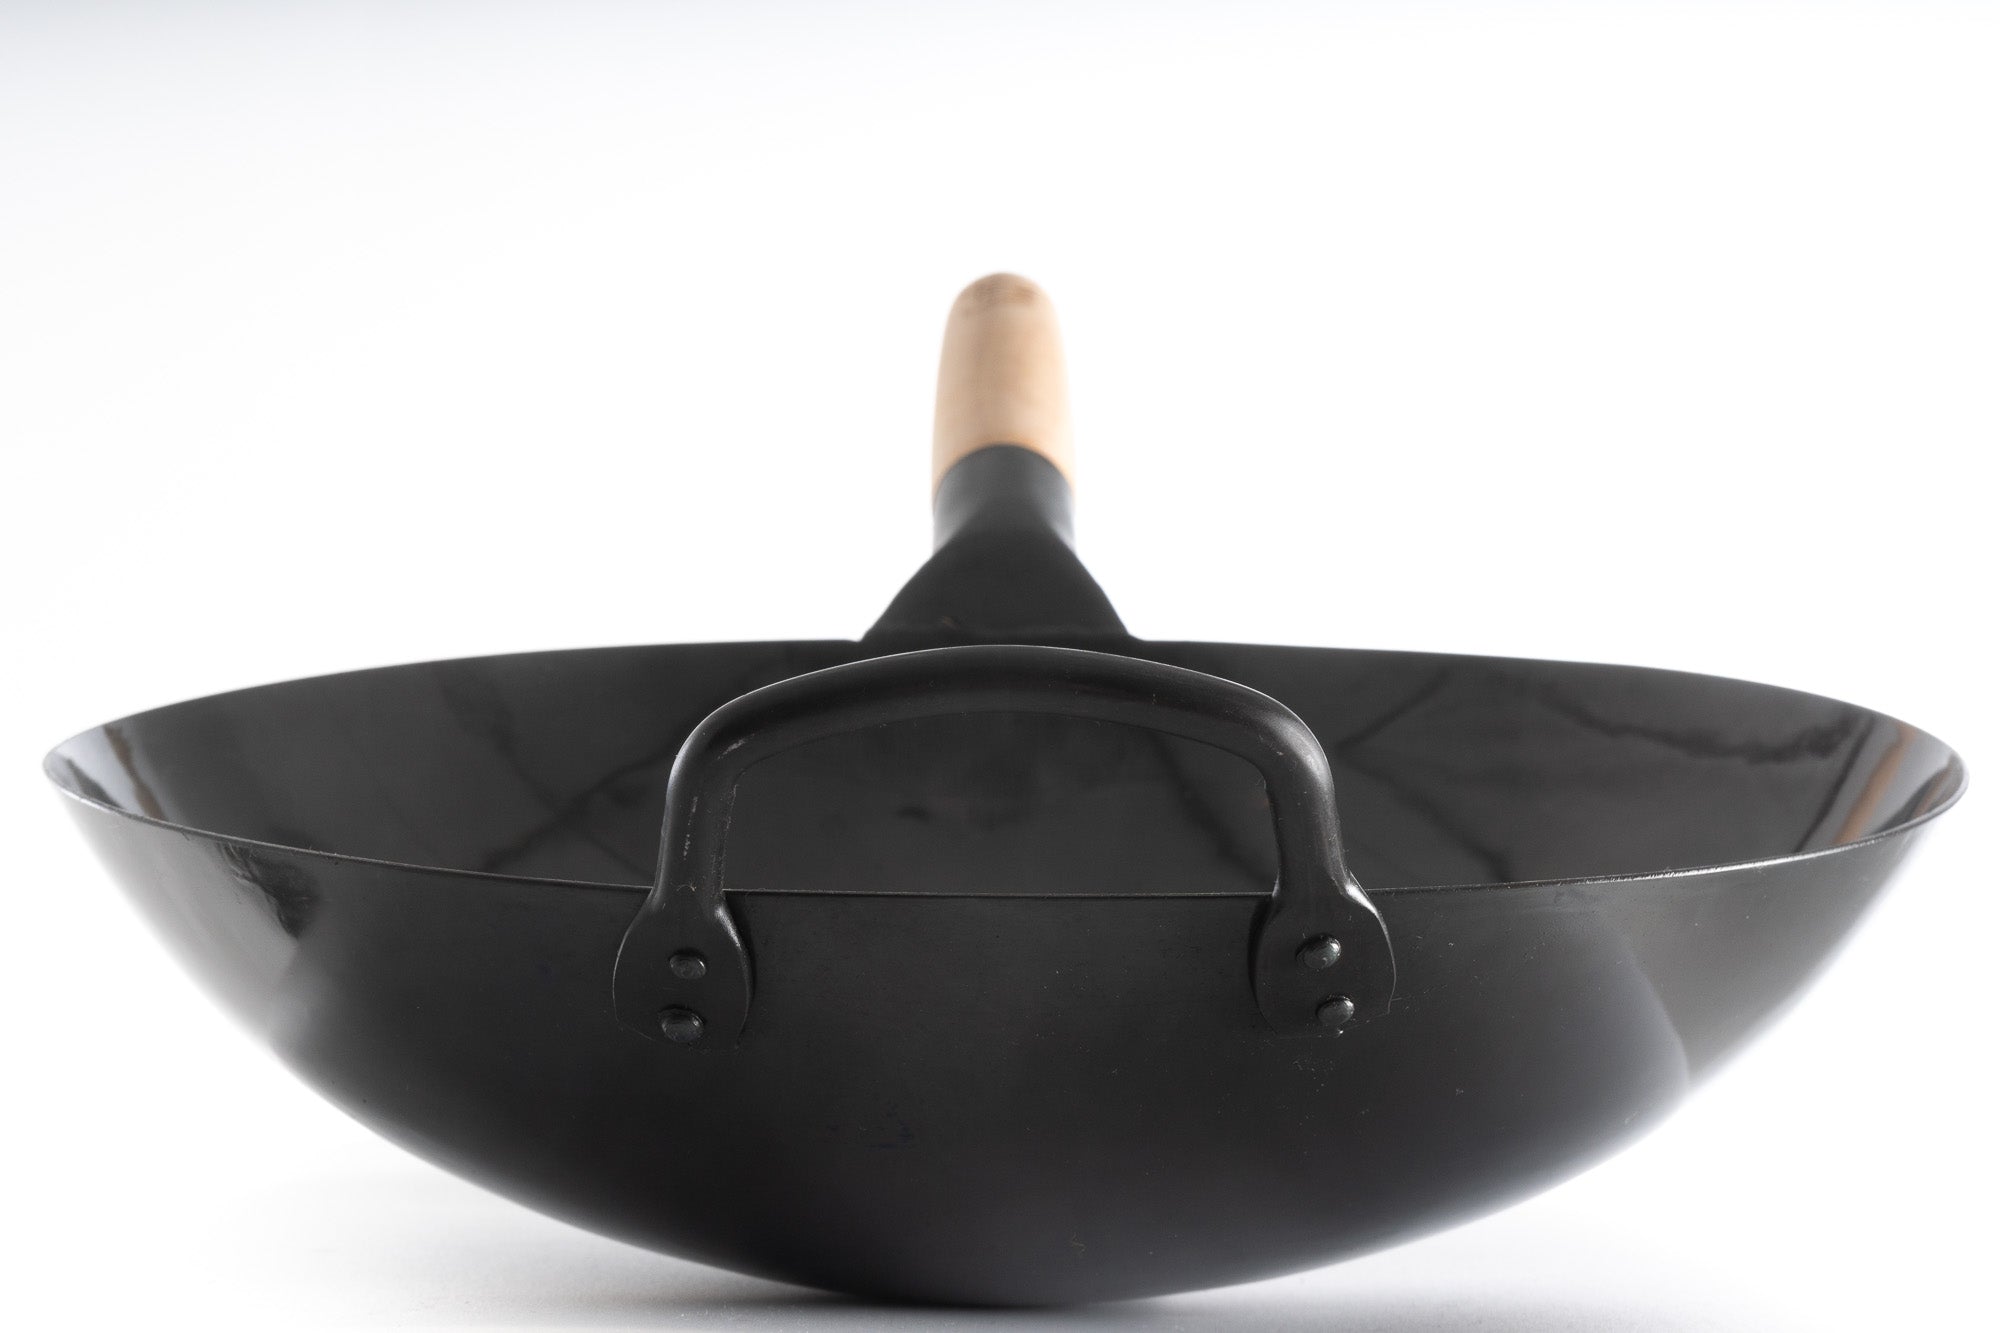 12 inch Carbon Steel Craft Wok with Wooden and Steel Helper Handle (Ro